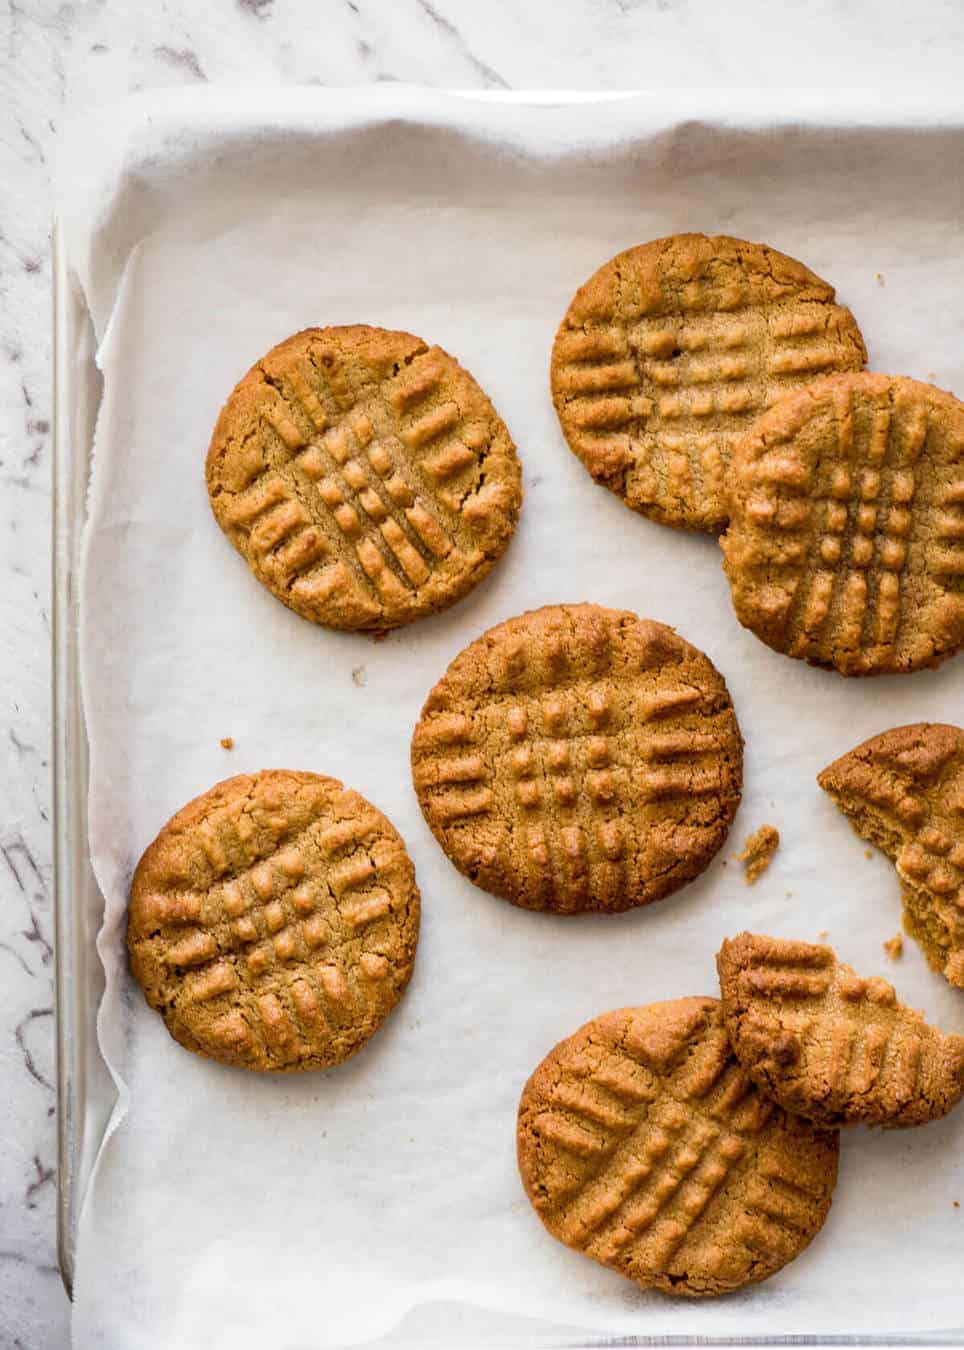 The World's Best Easy Peanut Butter Cookies are SOFT and CHEWY. Peanut butter, brown sugar and egg is all you need! www.recipetineats.com